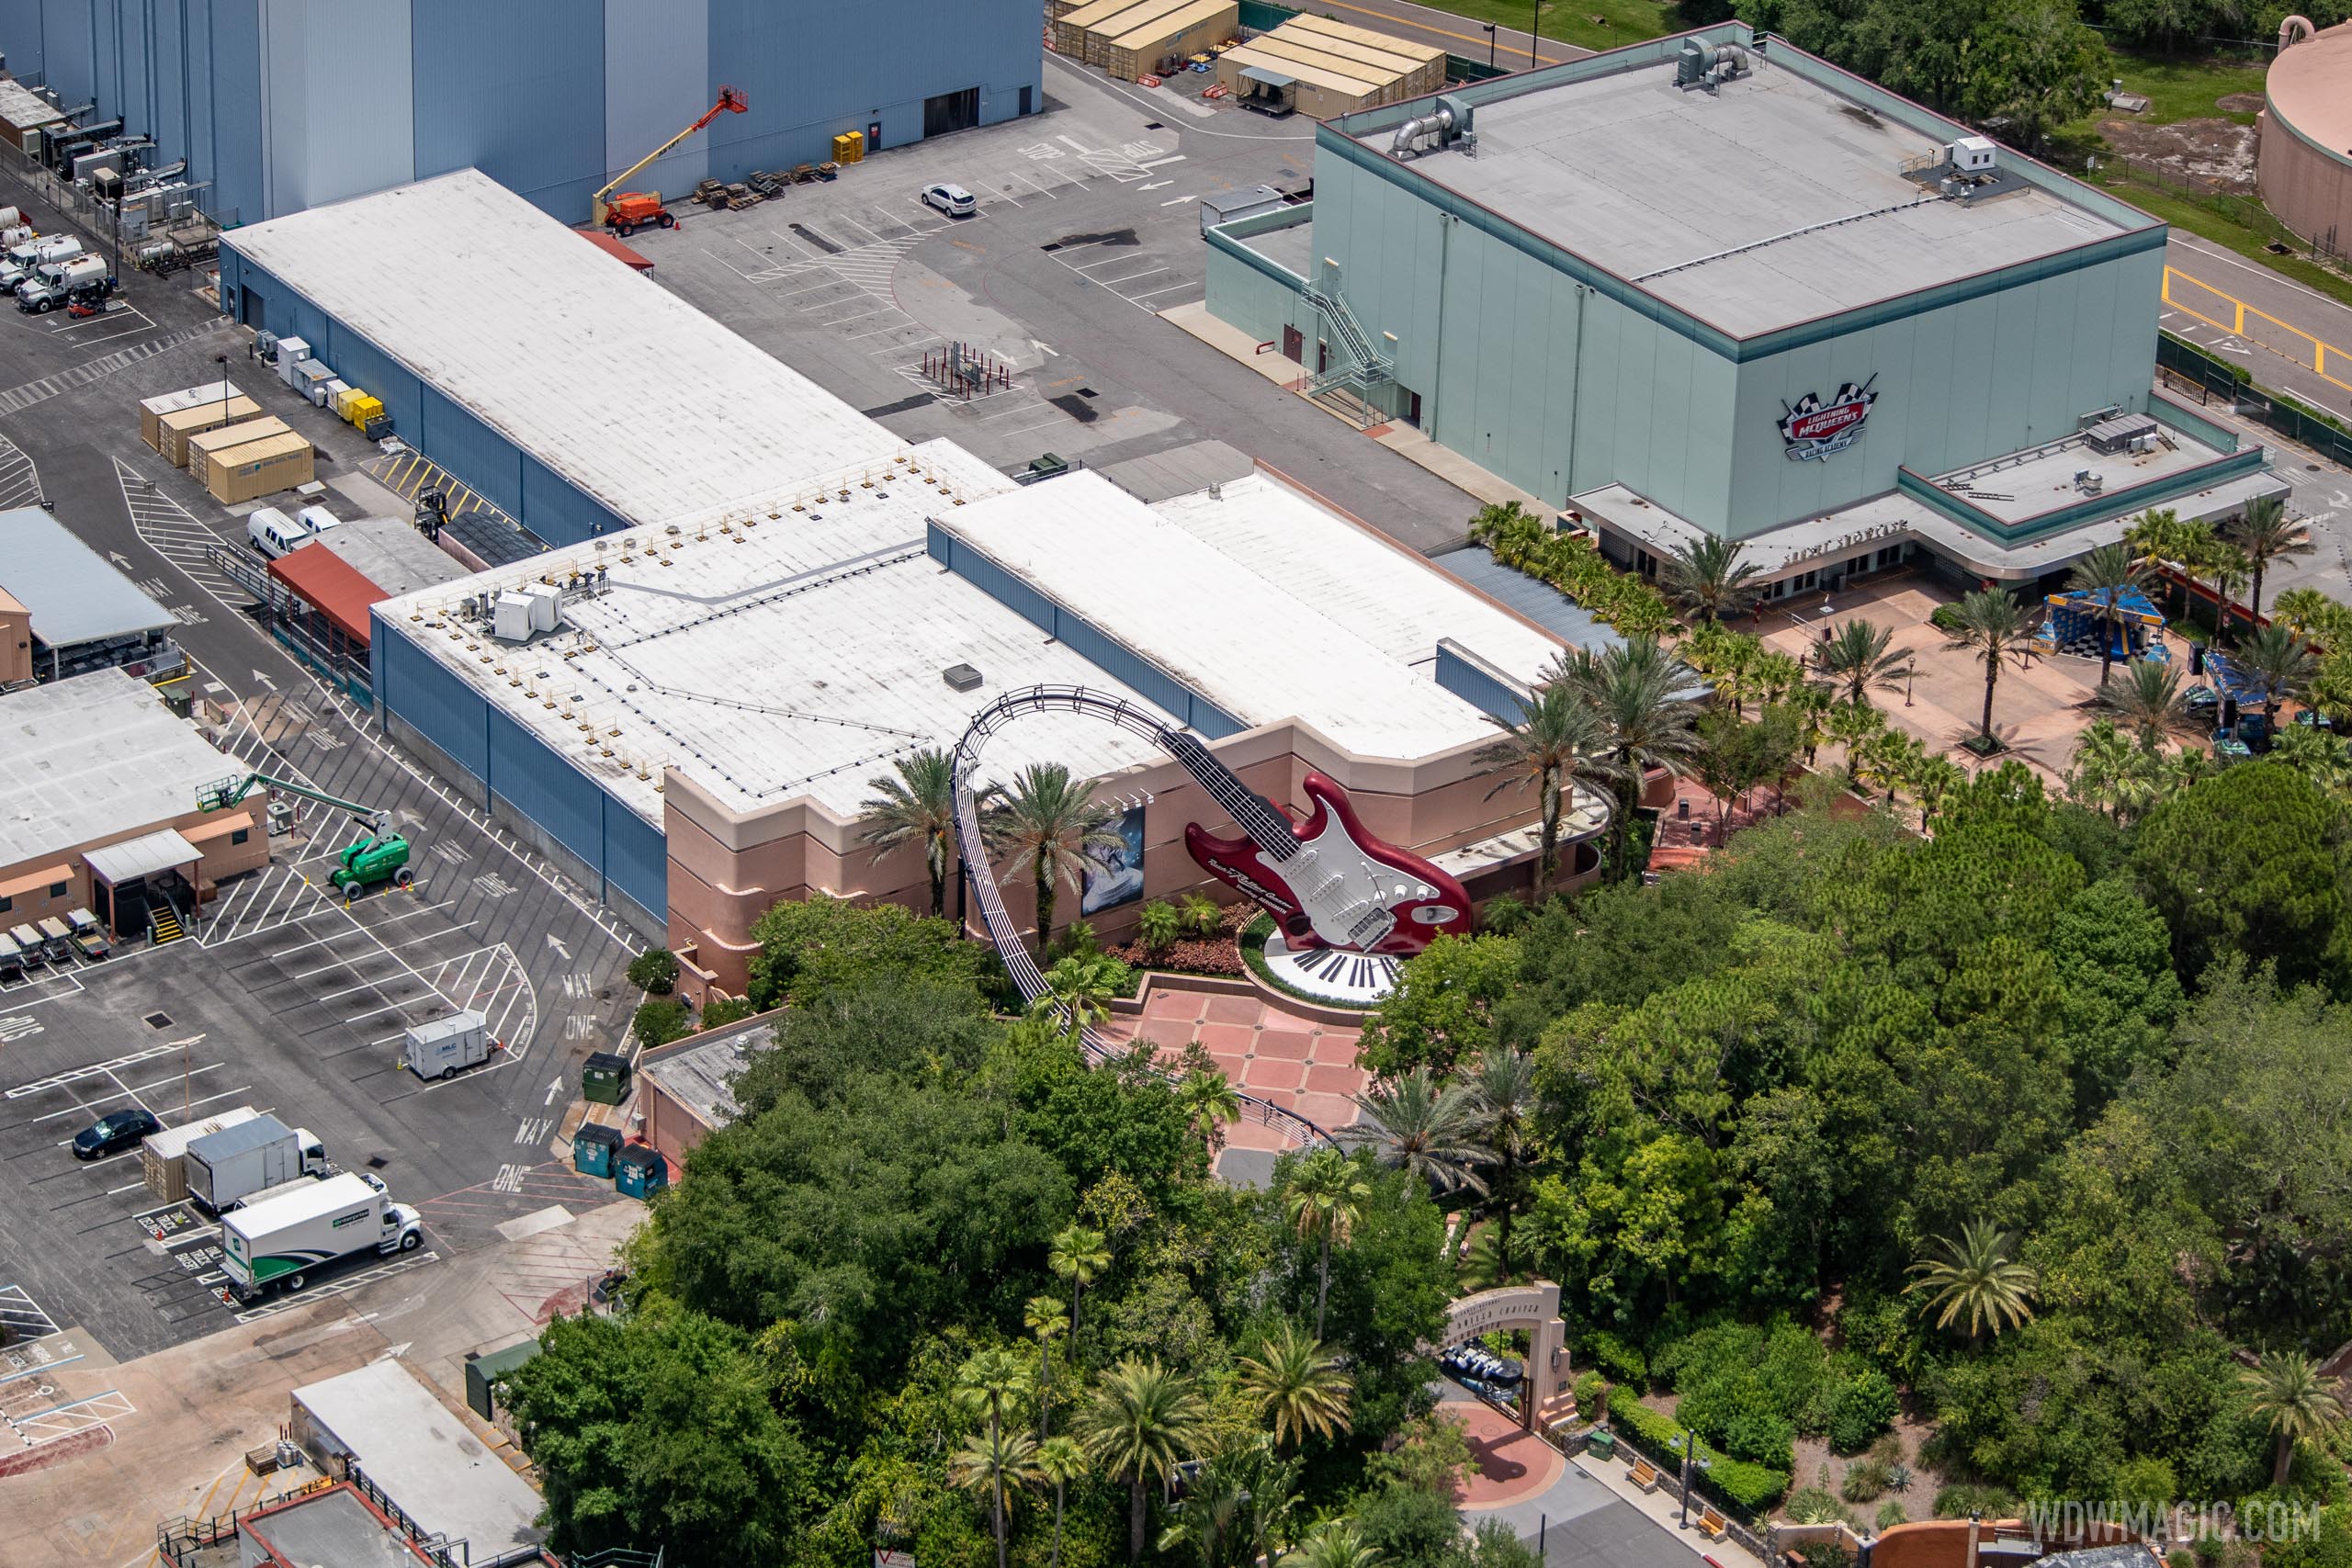 Rock ‘n’ Roller Coaster at Disney’s Hollywood Studios remains closed for a fourth day due to technical issues